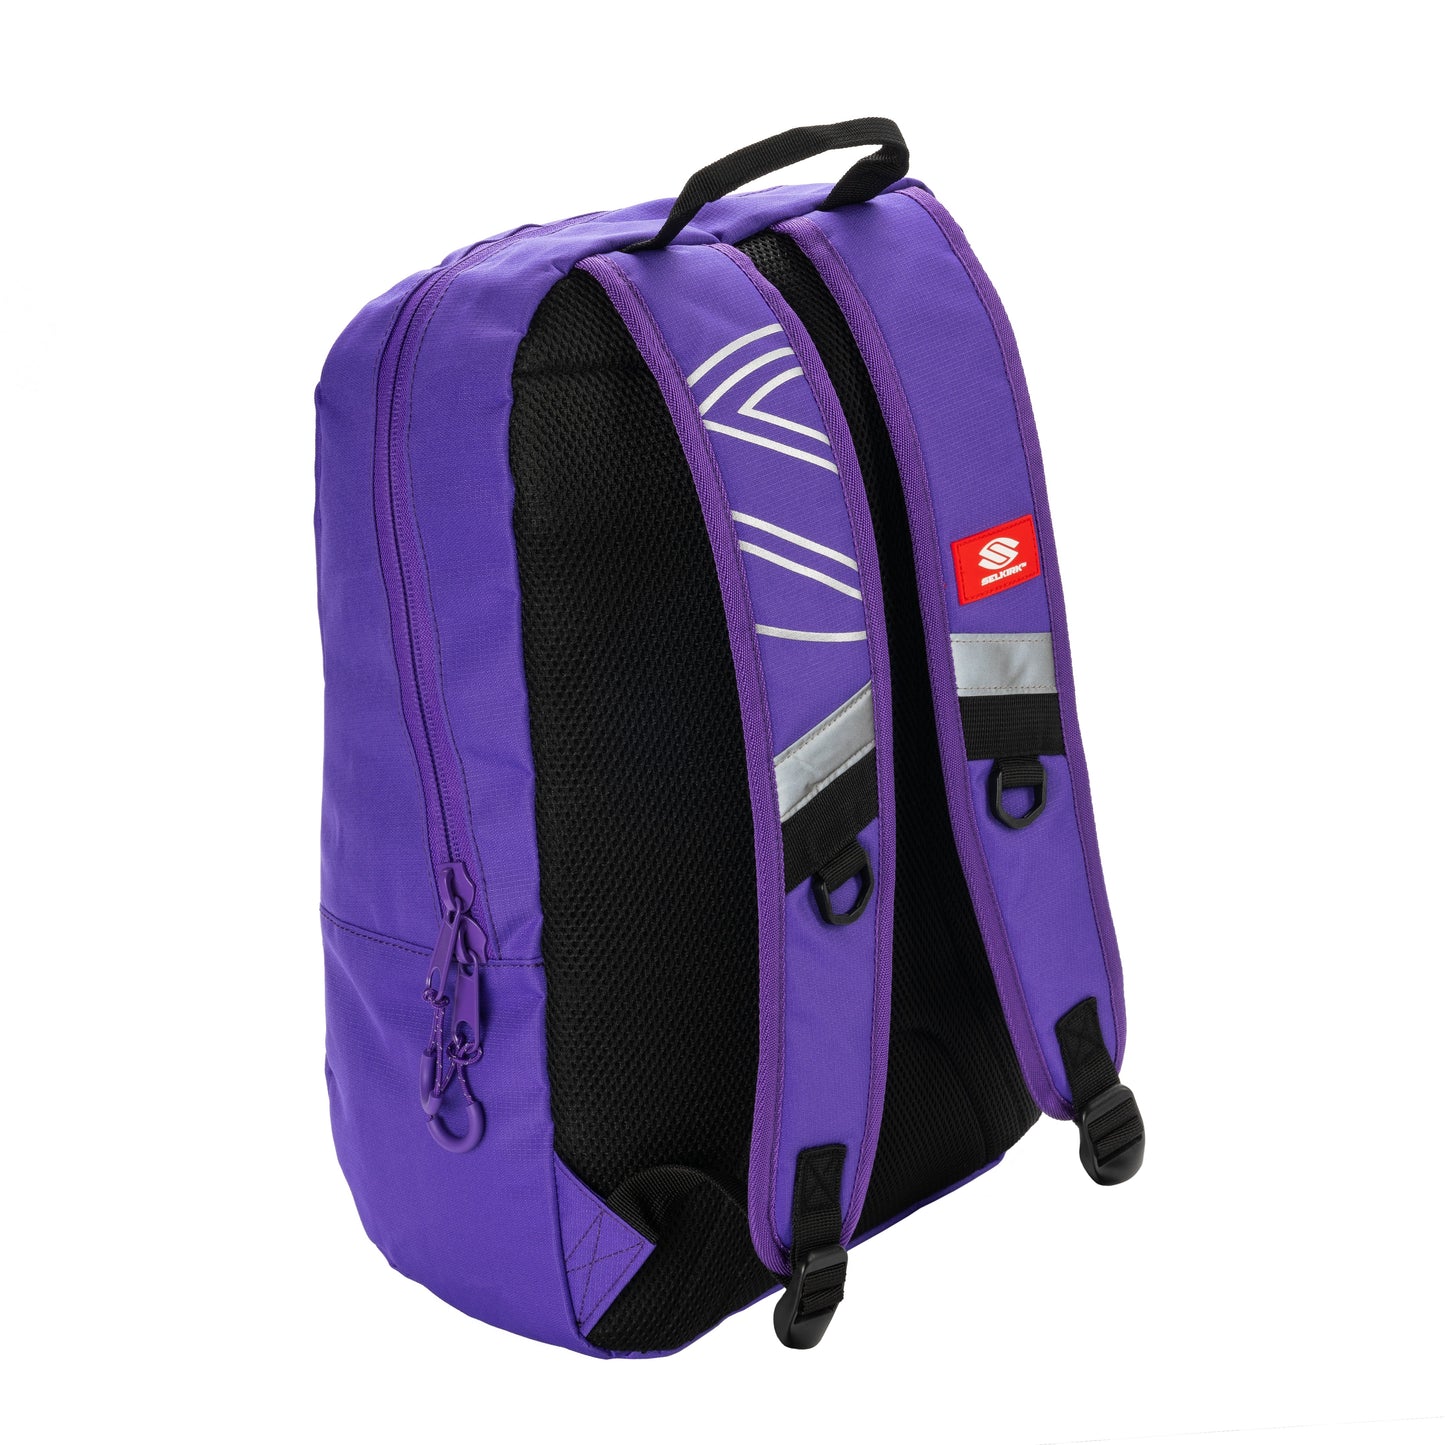 A Selkirk Core Series Day Backpack Pickleball Bag with black straps.